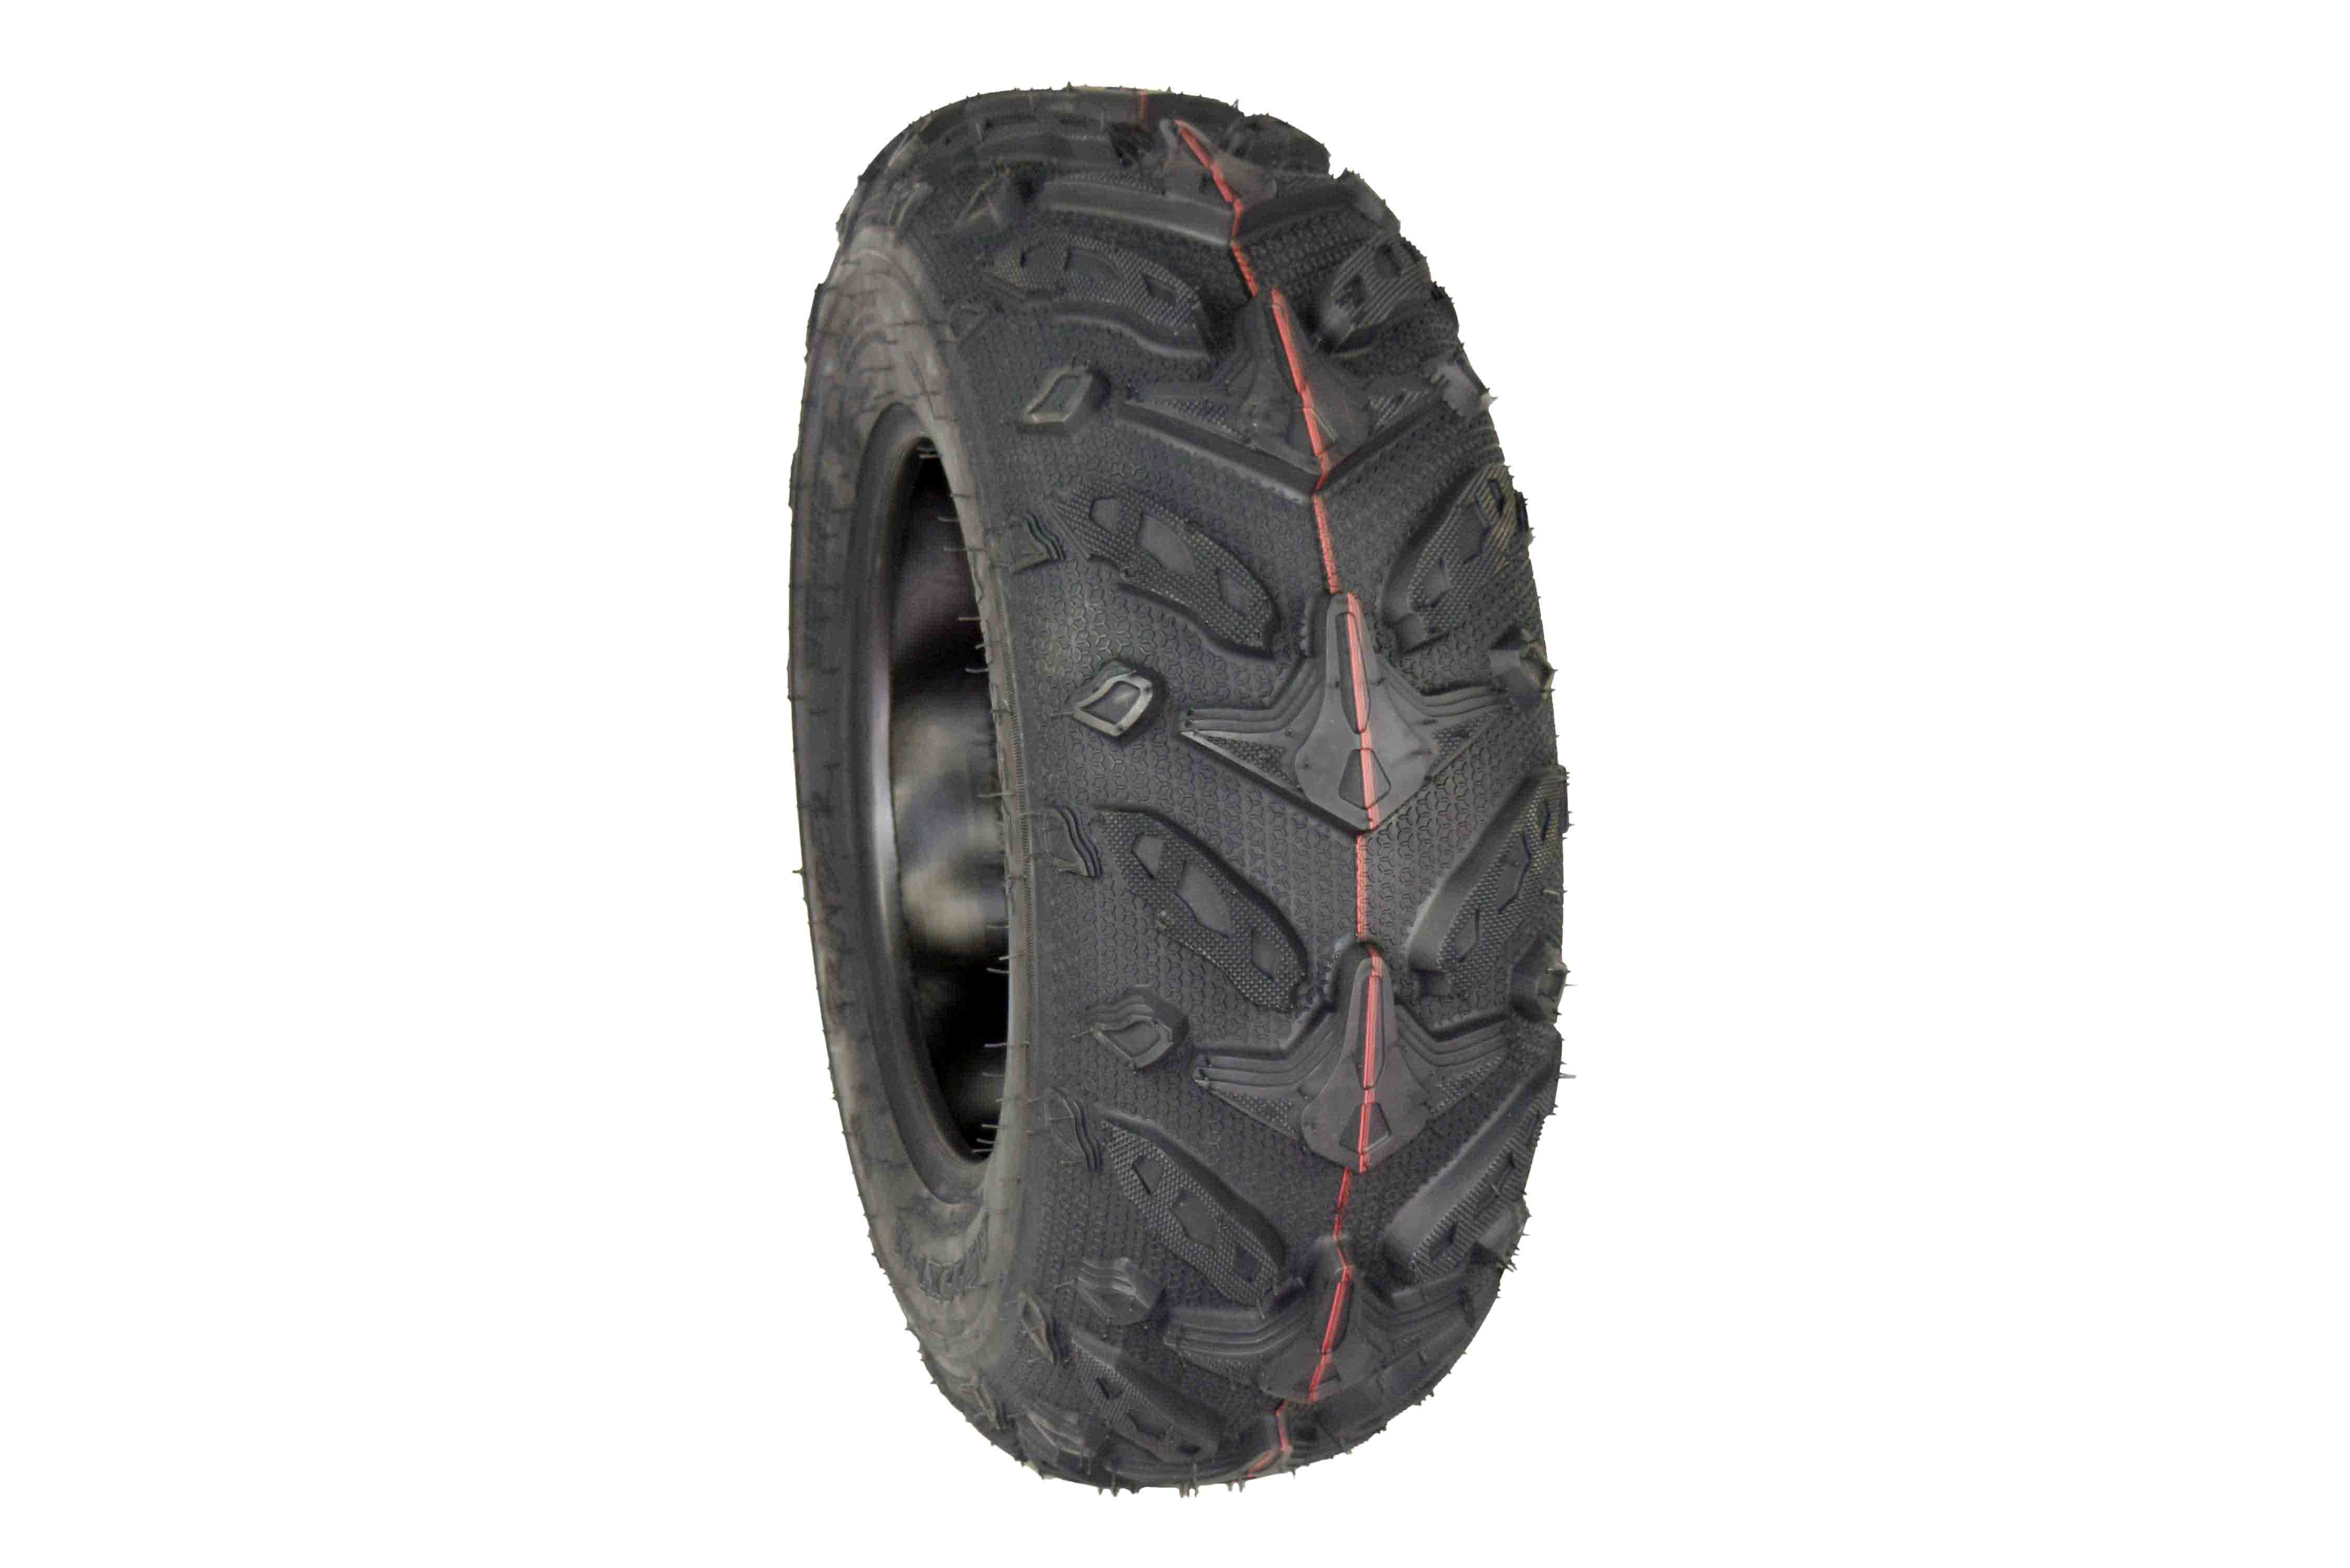 MASSFX-Grinder-22x7-11-Front-ATV-Tire-6-Ply-for-Soft-Hard-Pack-Ground-image-1